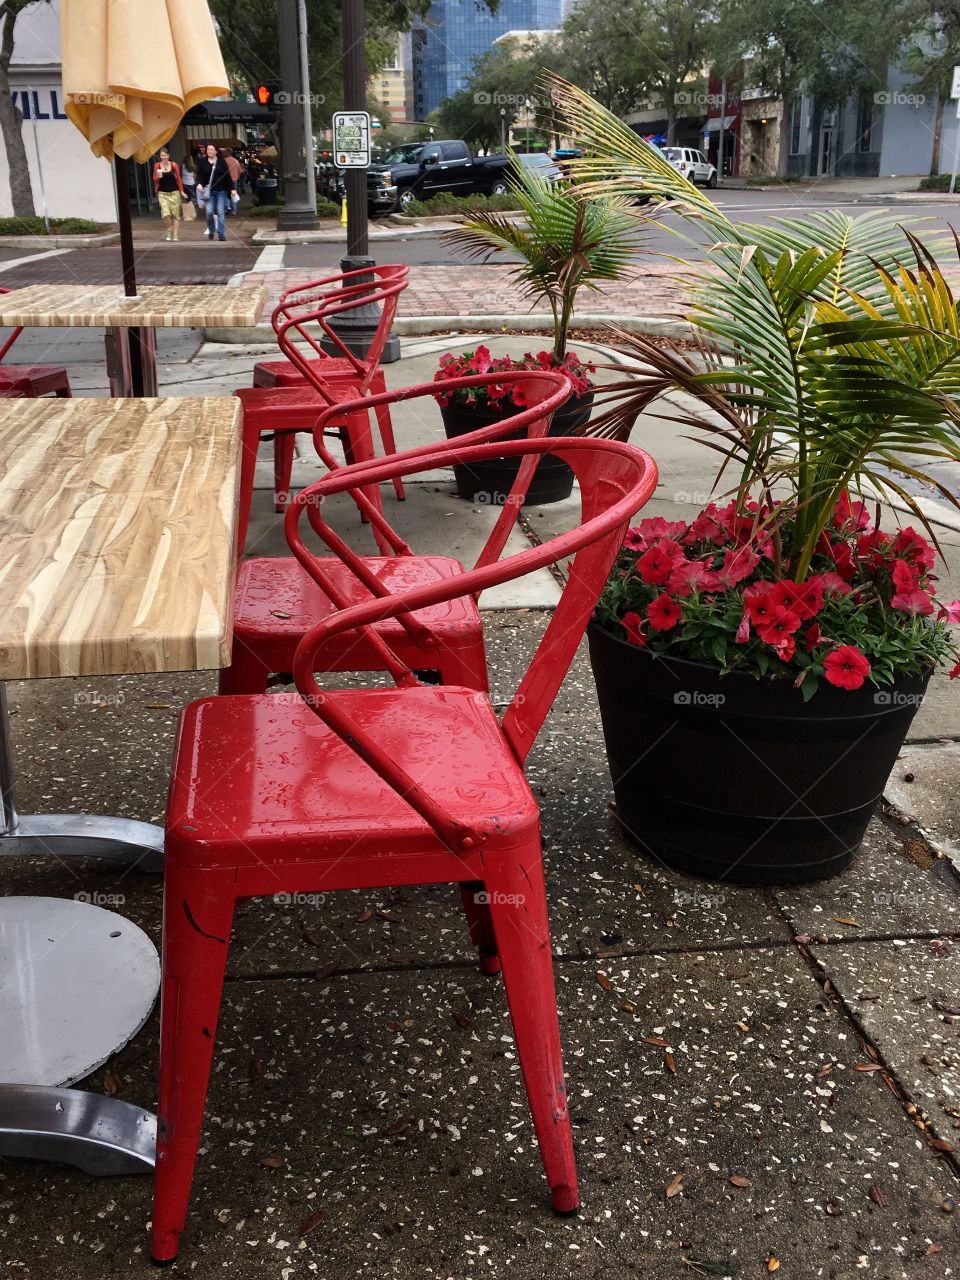 Sidewalk cafe with red chairs